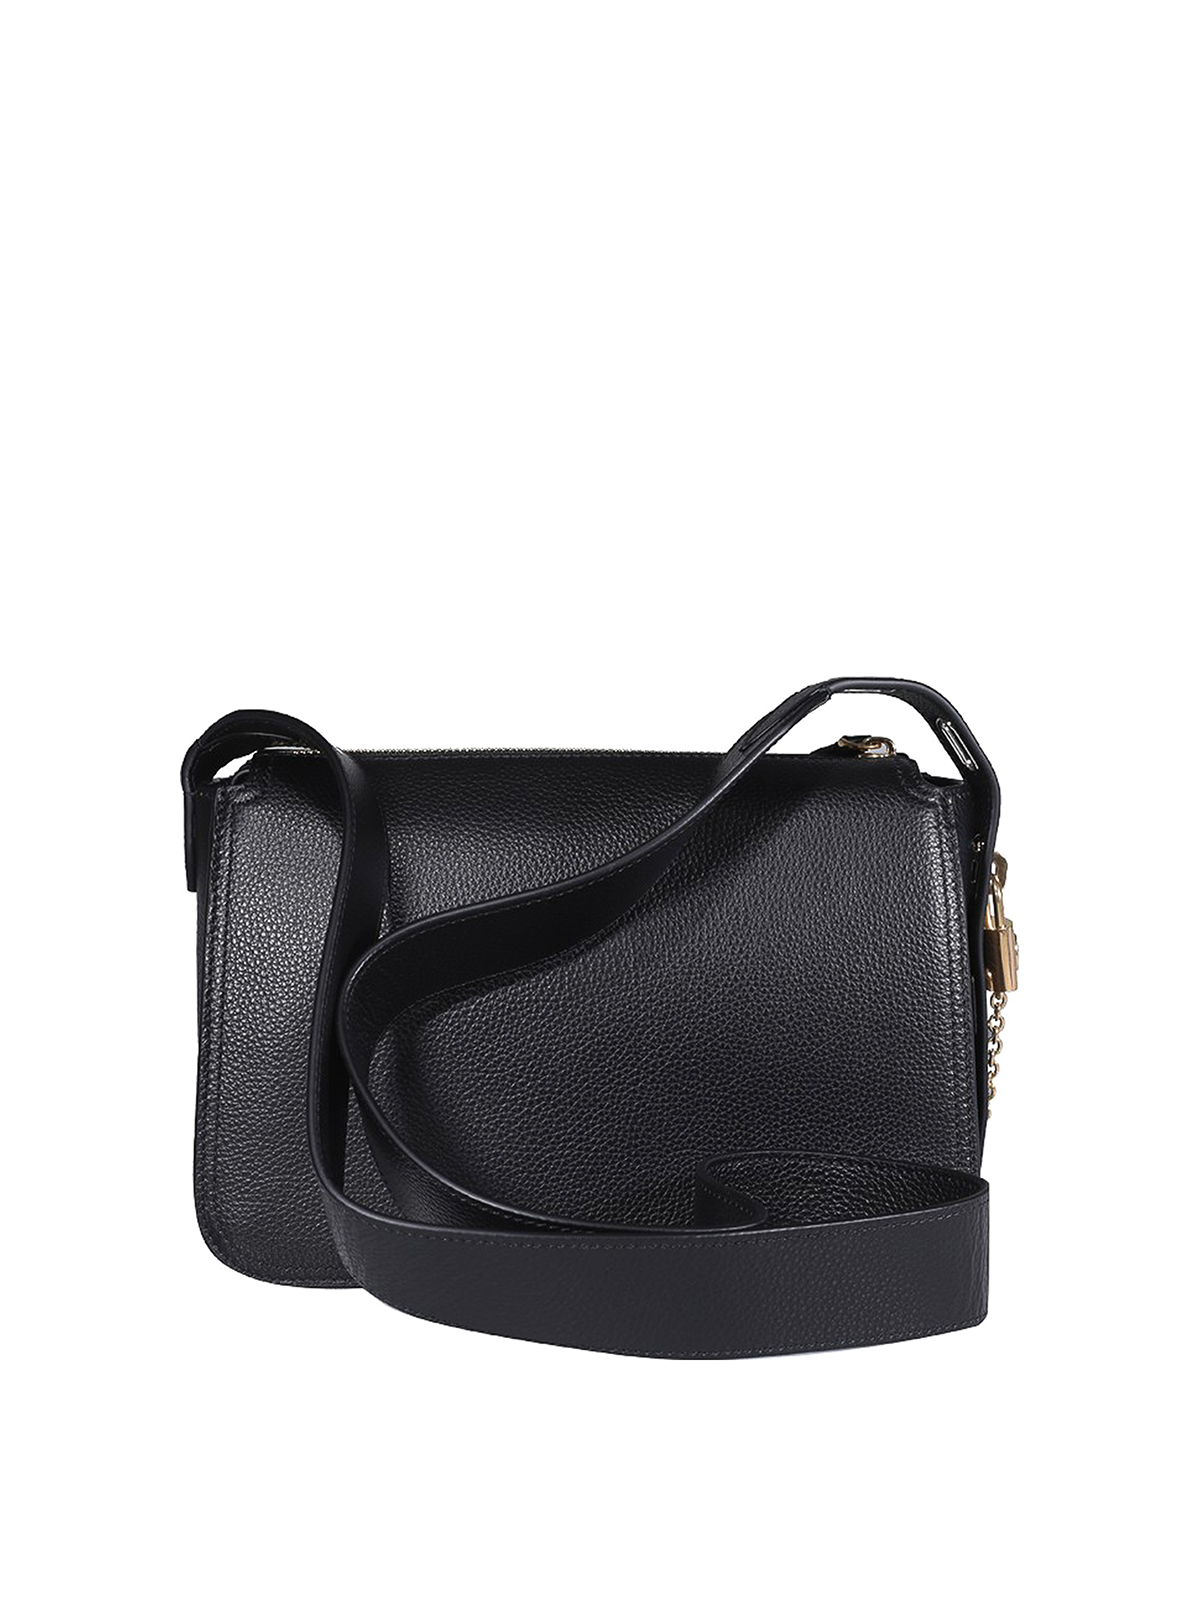 Mulberry Long Zip Wallet Black Leather – Luxe Collective